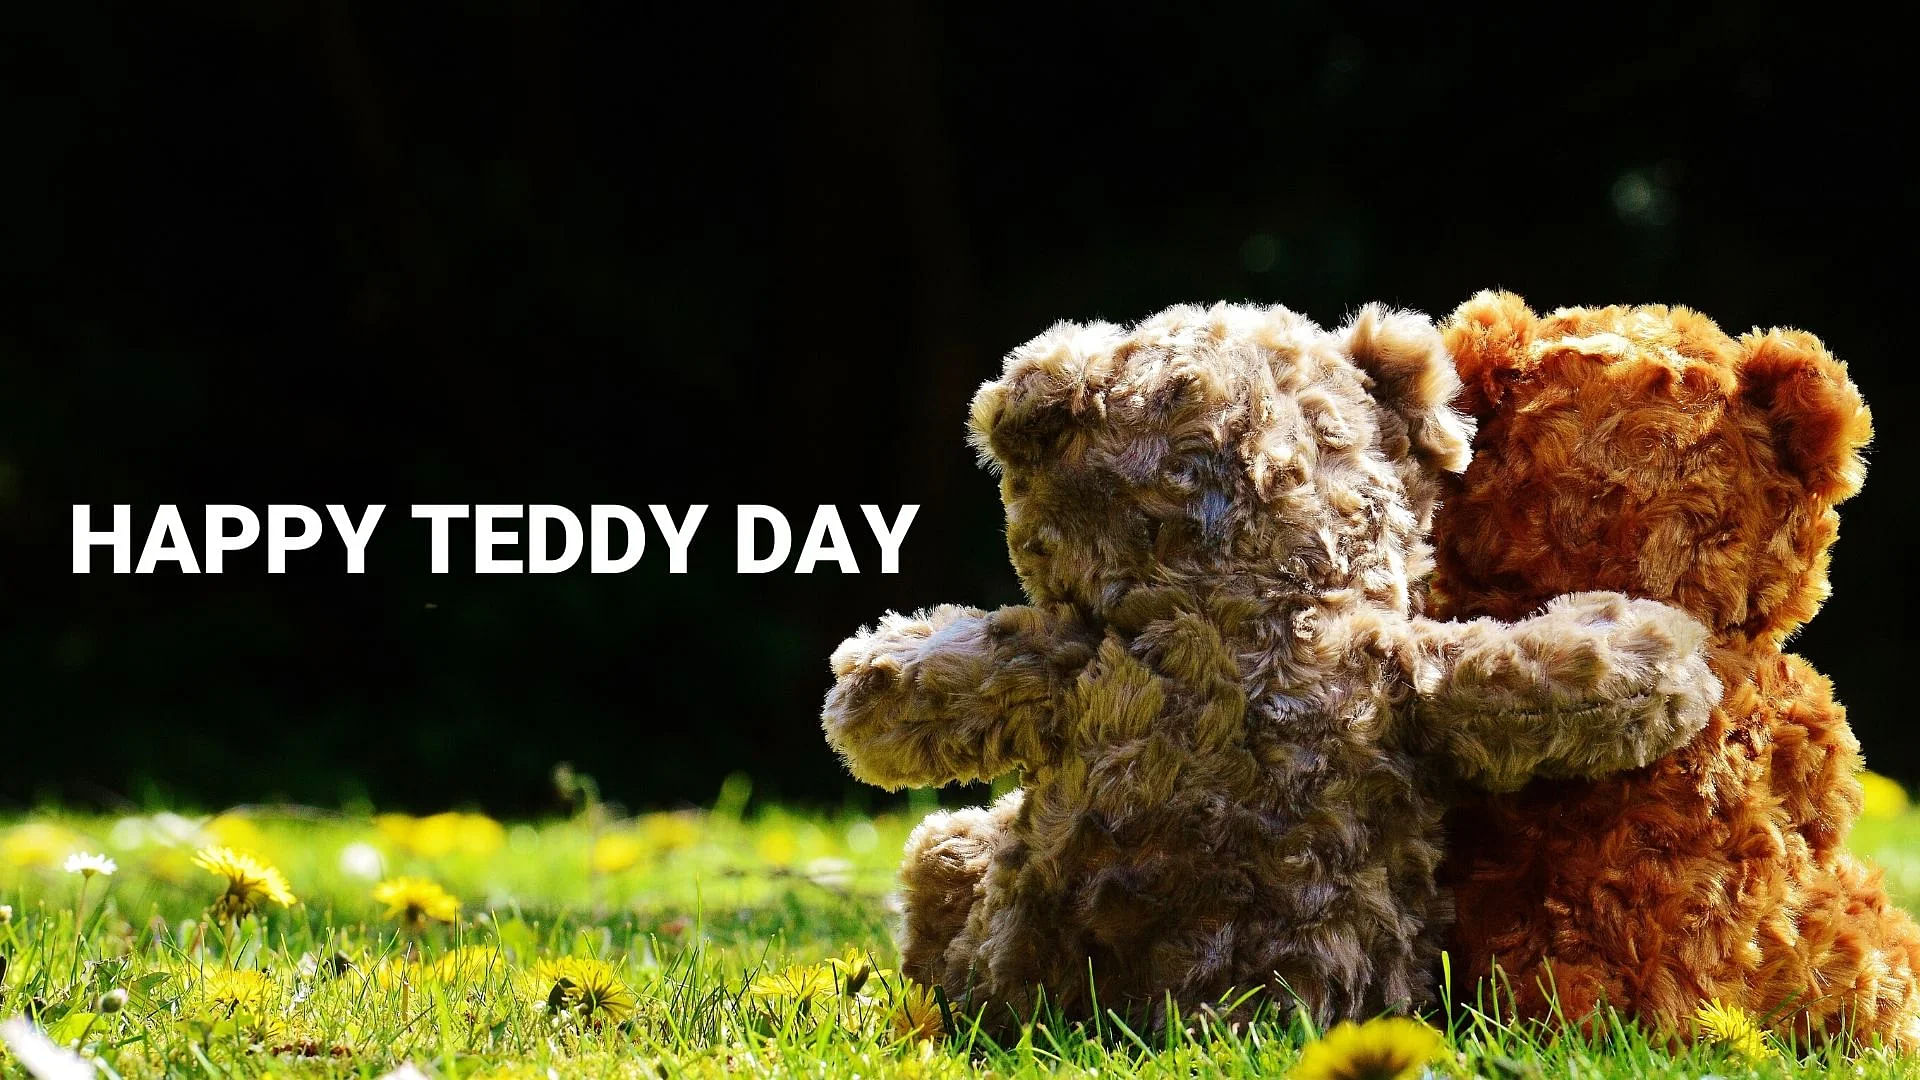 Happy Teddy Day 2021 quotes, images and wishes.